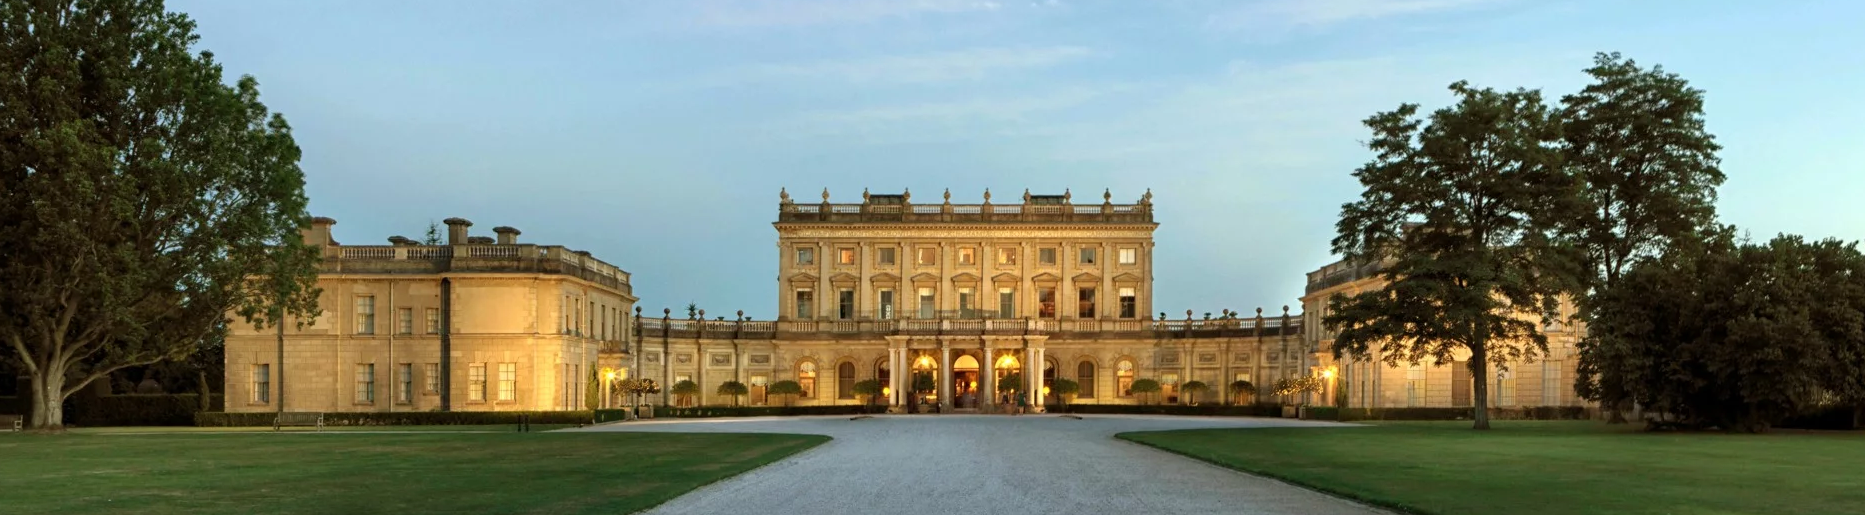 sincura members are invited to an evening at clivedon house